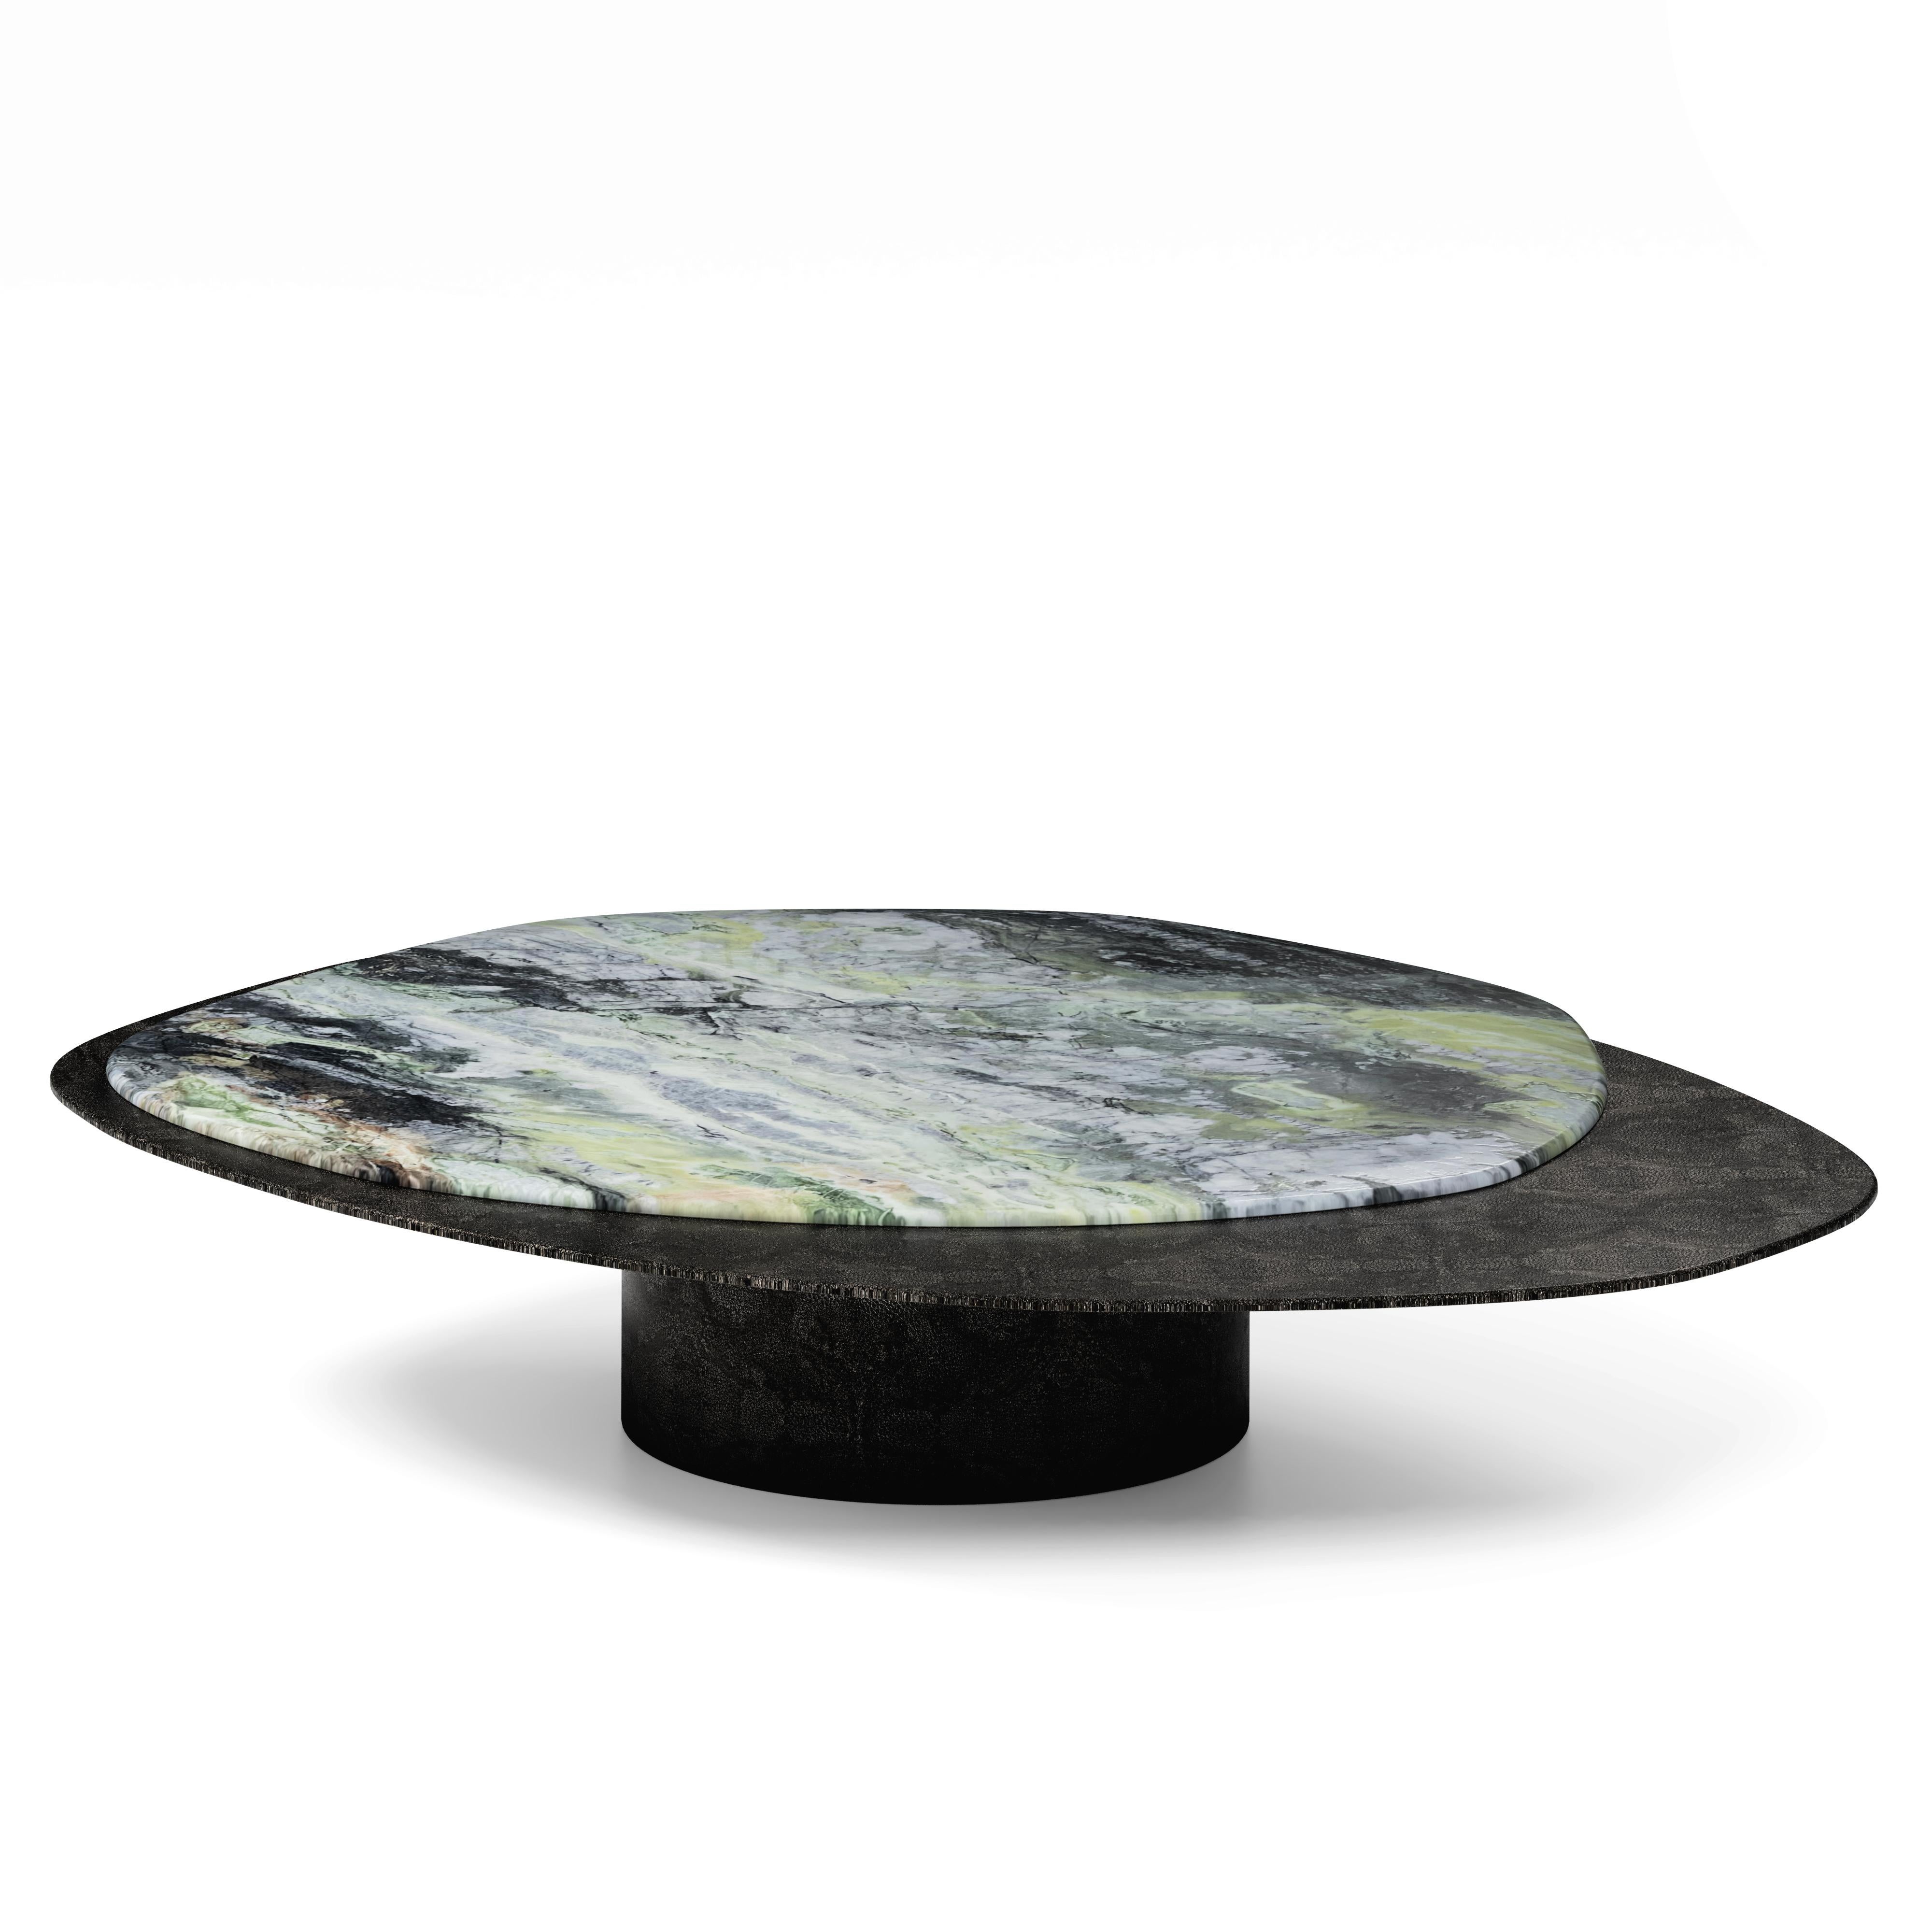 “The Epicure X” Contemporary center coffee table ft Jade River marble and antique nickel silver in regged ray skin

Luxury doesn’t always follow the common patterns. Luxury goes beyond and almost like one of the best gourmets joins varied